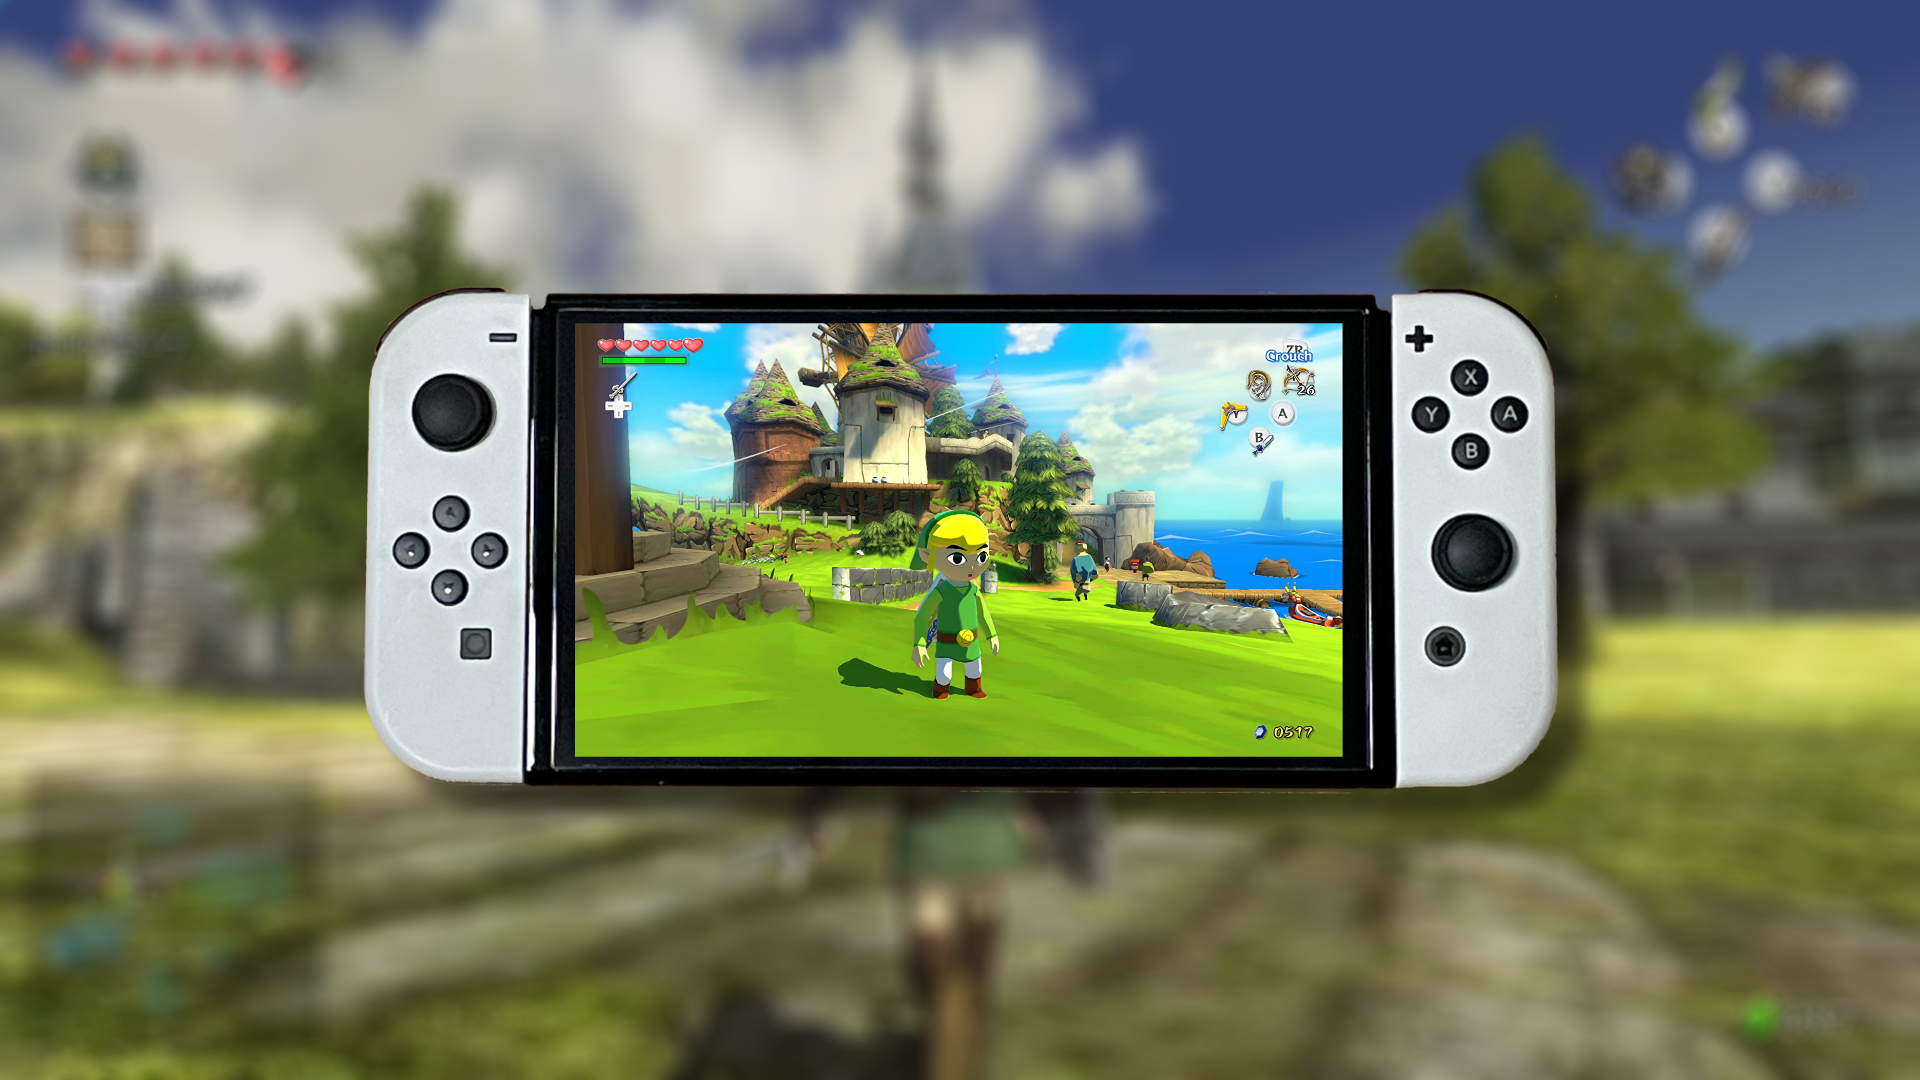 Windwaker and Twilight Princess Switch reportedly due for reveal